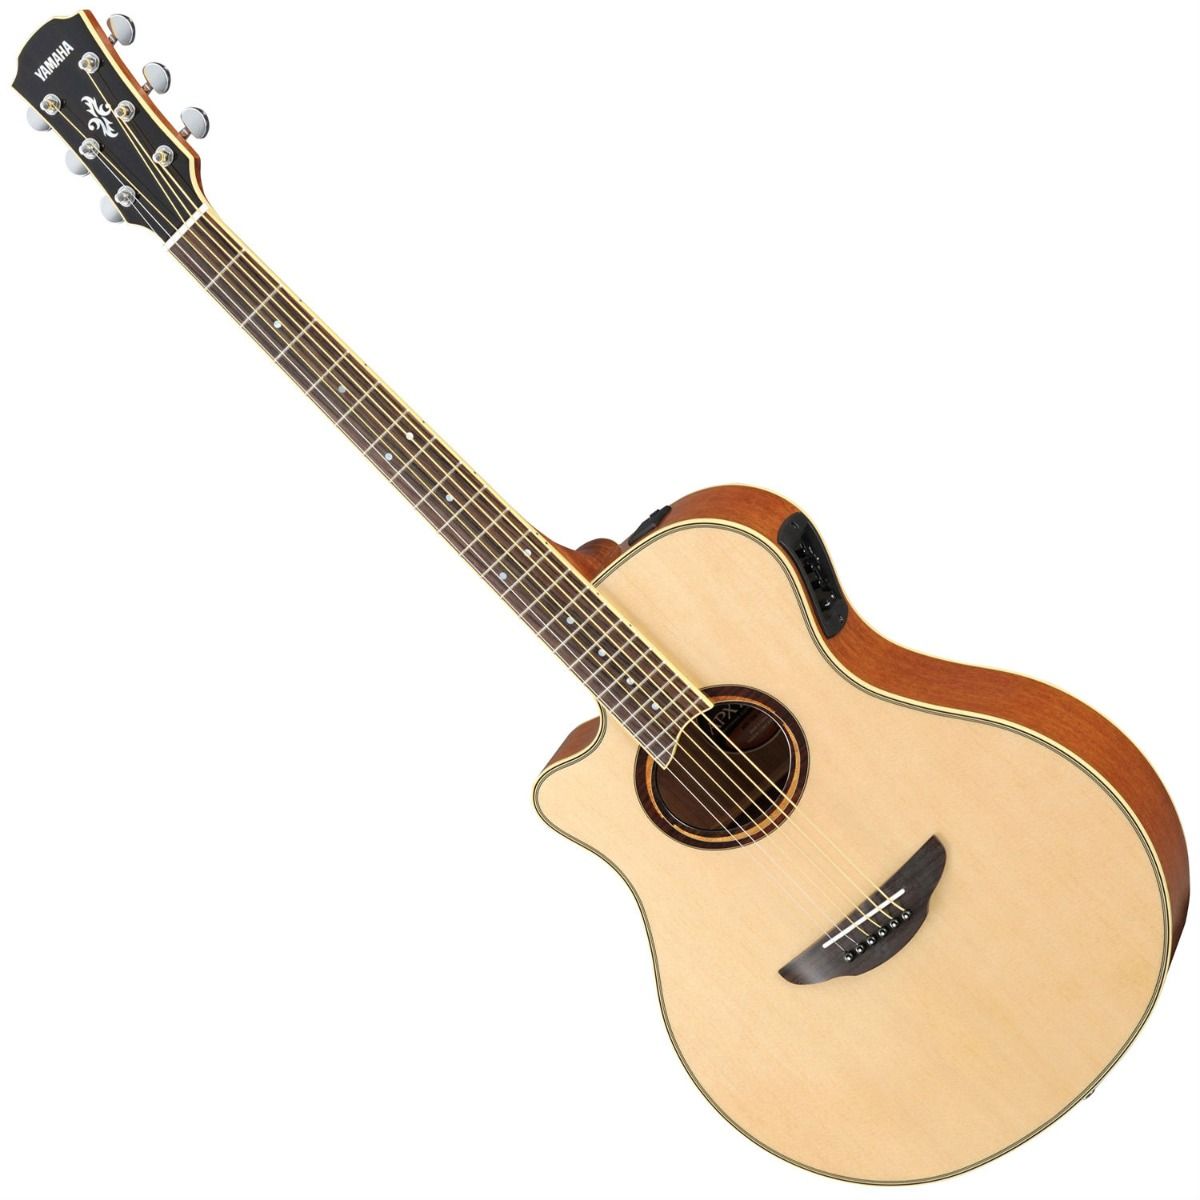 Yamaha Apx700iil Left-Handed Thinline Acoustic-Electric Guitar - Natural